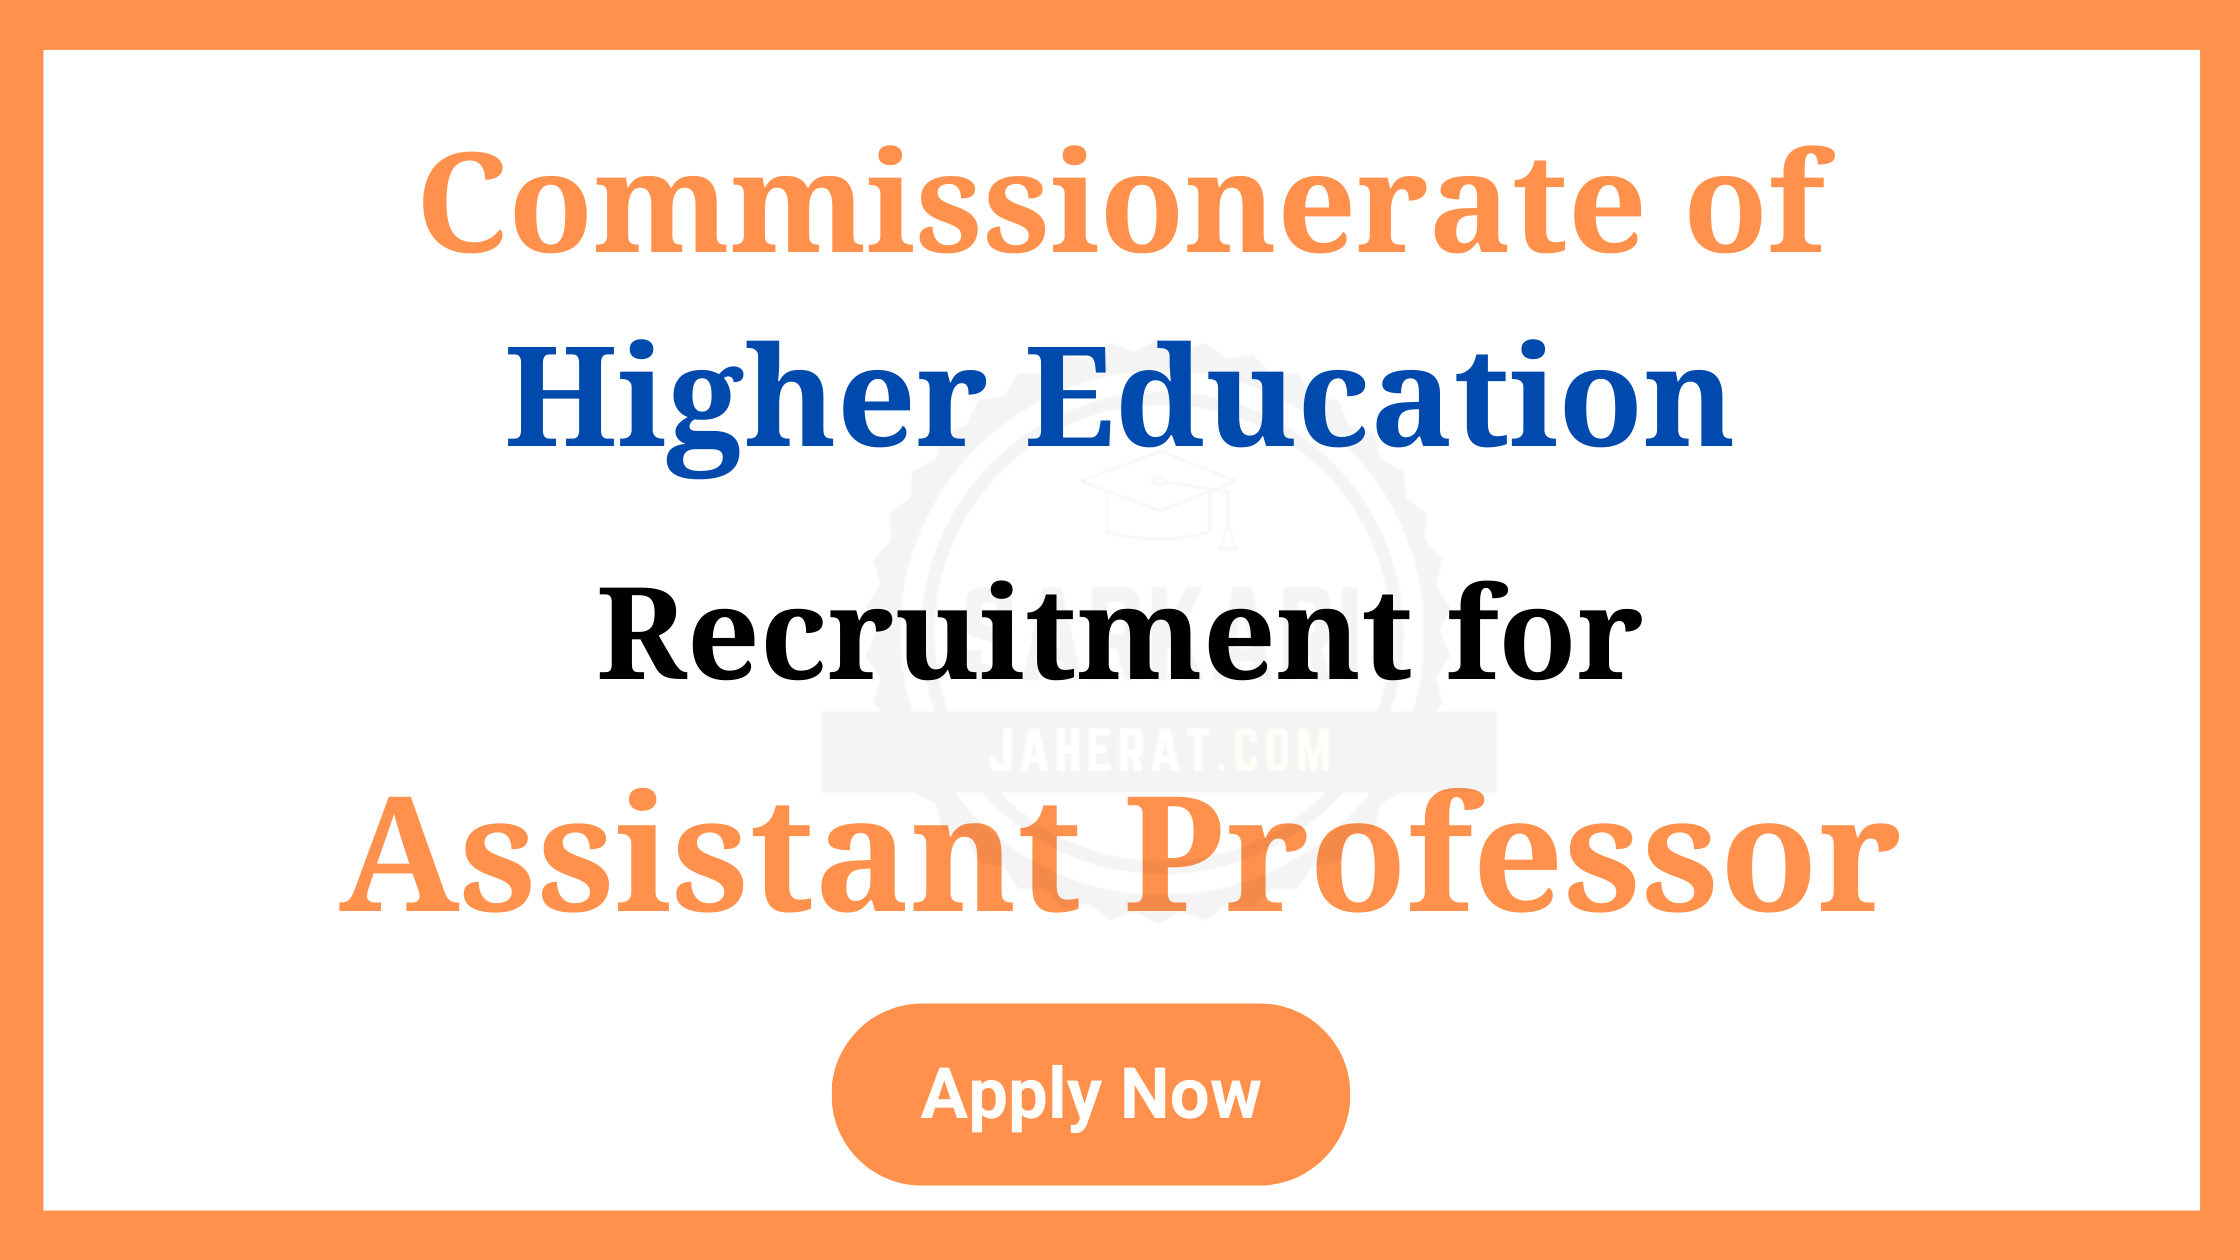 Commissionerate of Higher Education Recruitment for 780 Assistant Professors.